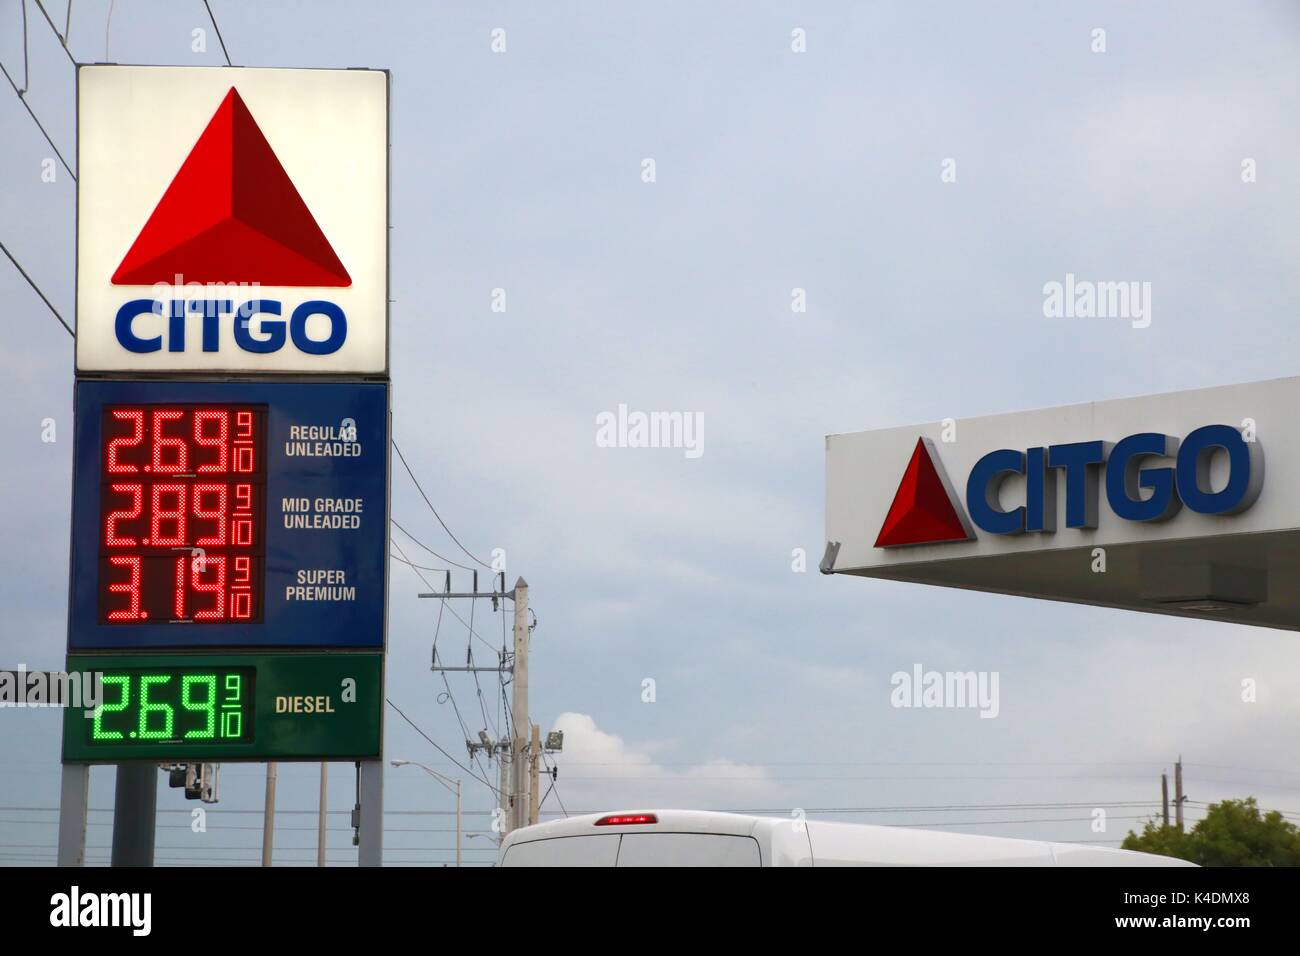 Citgo Gas Station Offers Regular $2.69 and 9/10ths Mid-Grade at $2.89 and 9/10ths Super Premium at $3.19 and 9/10ths and Diesel at $2.69 and 9/10ths Stock Photo